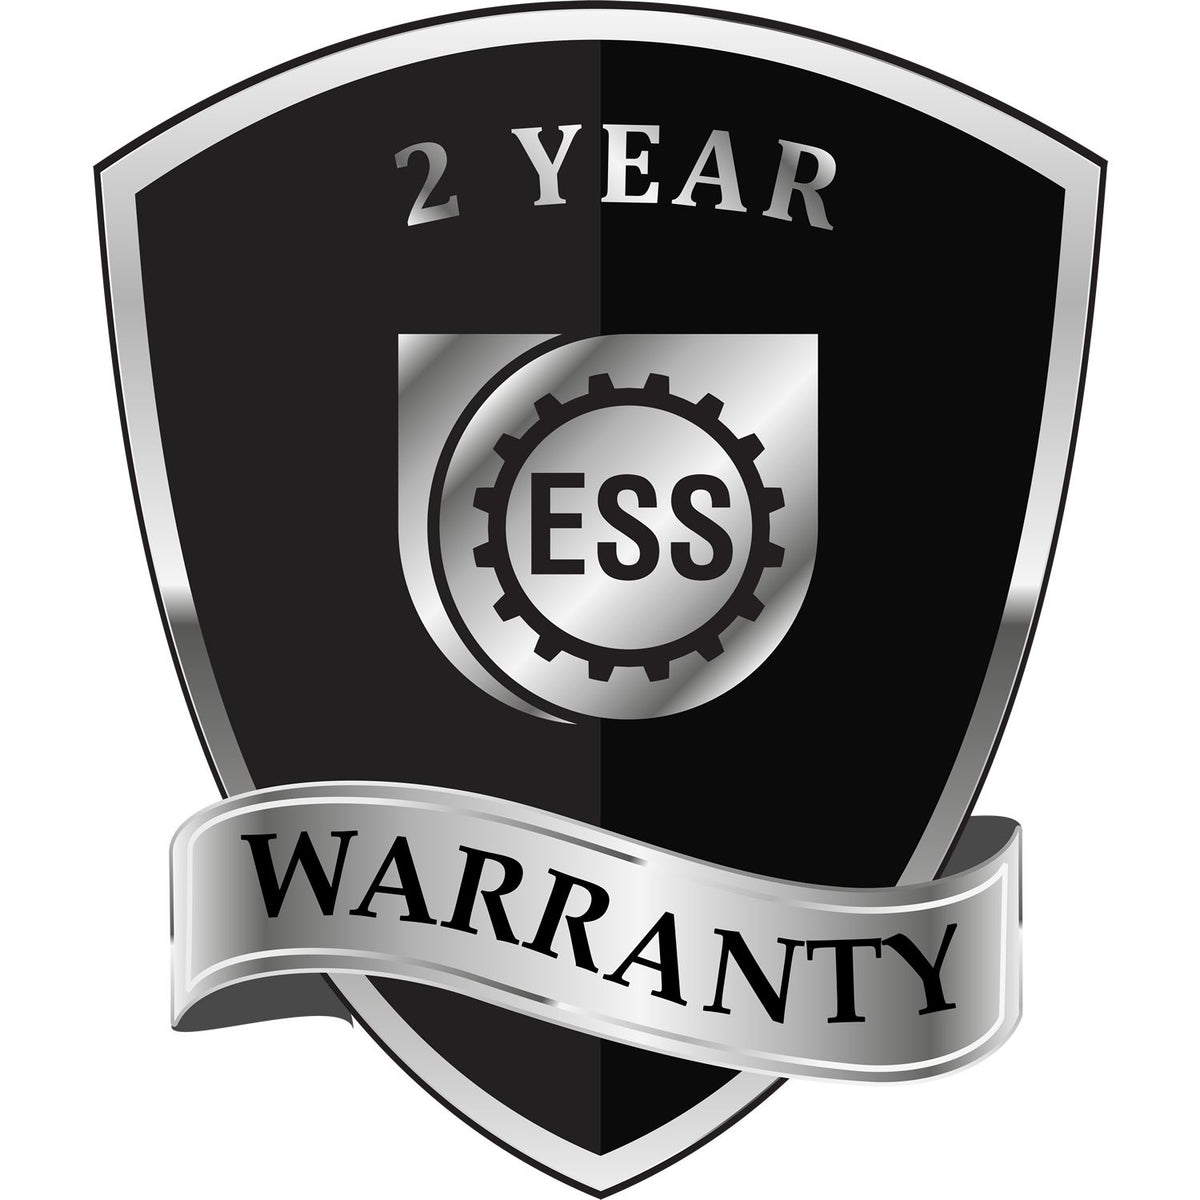 A badge or emblem showing a warranty icon for the Long Reach Missouri Land Surveyor Seal